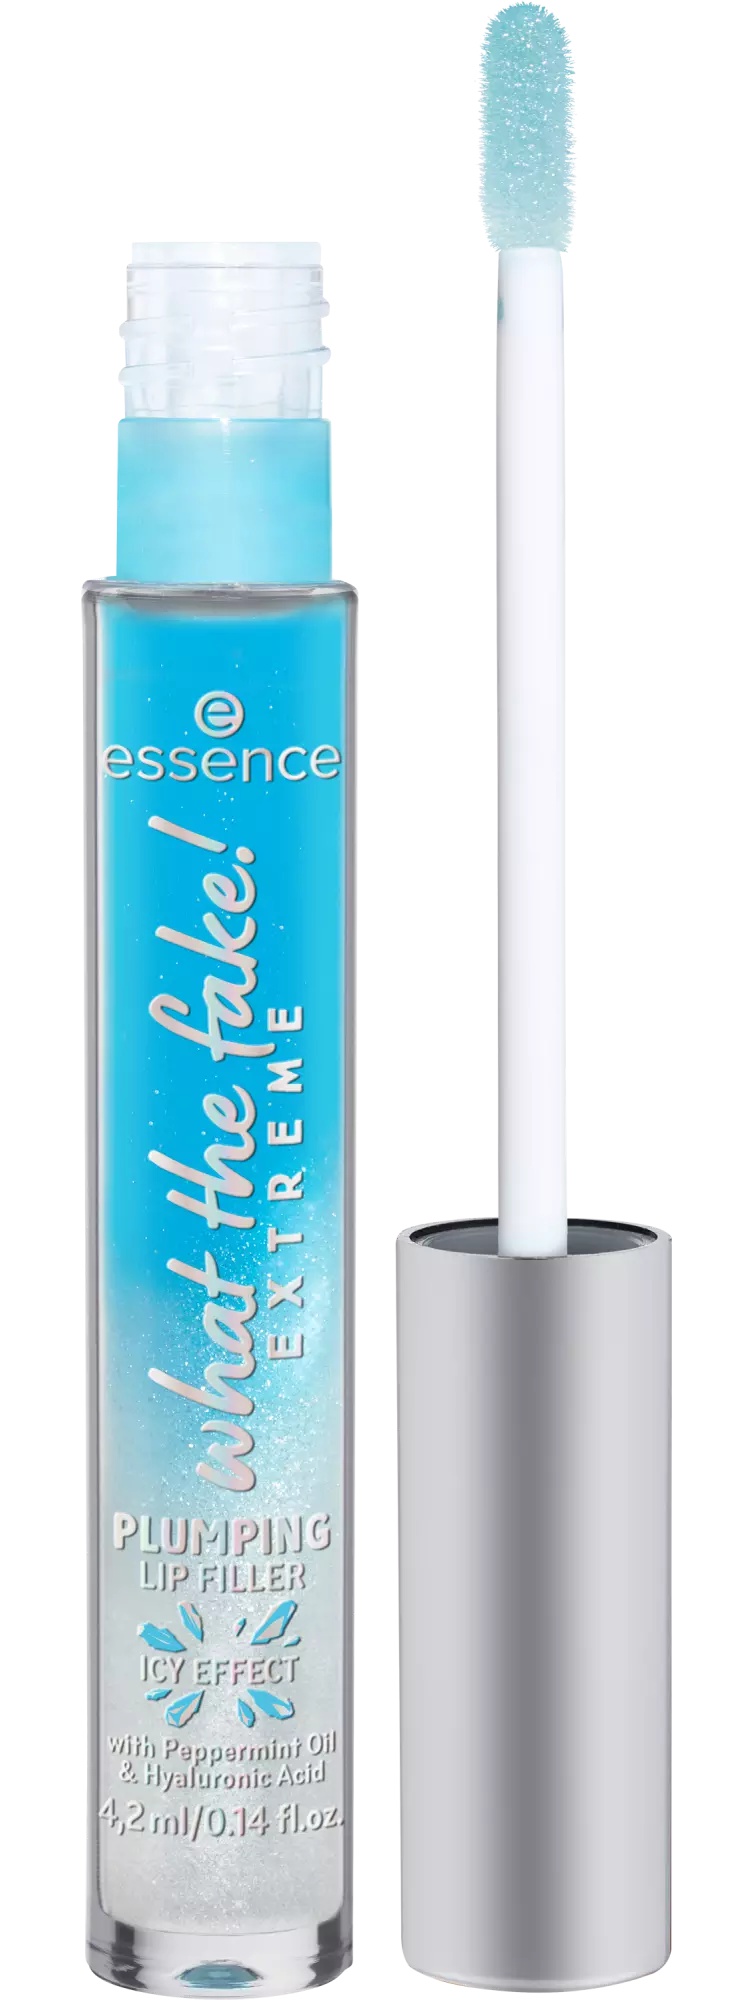 Essence What The Fake! Extreme Plumping Lip Filler Icy Effect